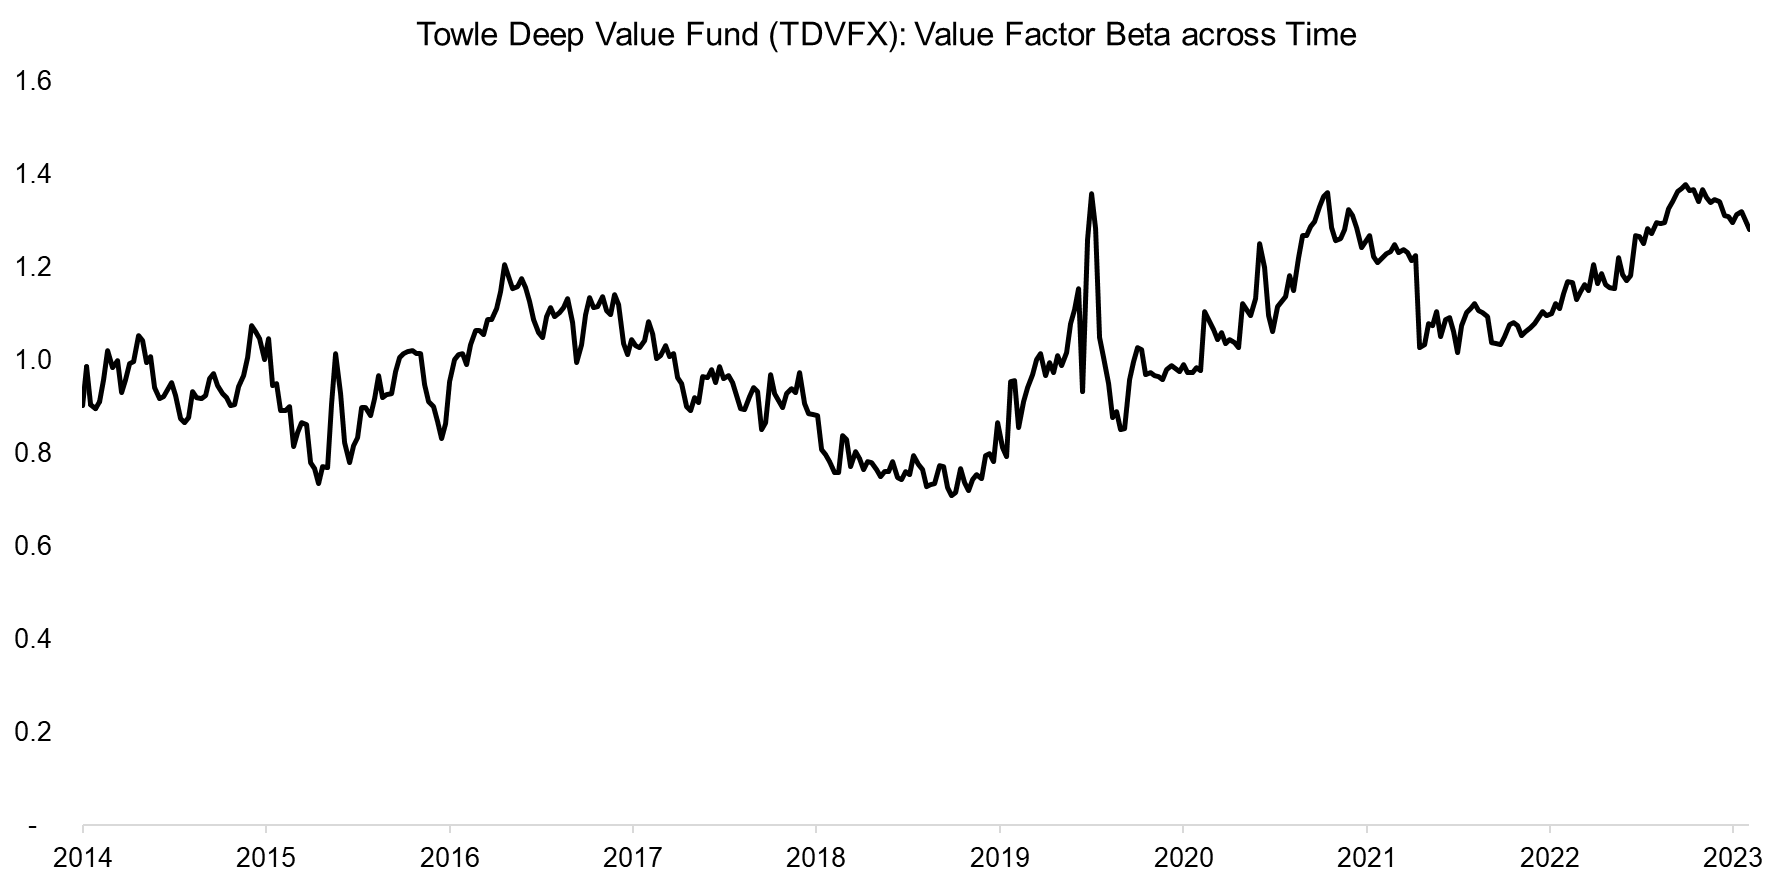 Towle Deep Value Fund (TDVFX) Value Factor Beta across Time